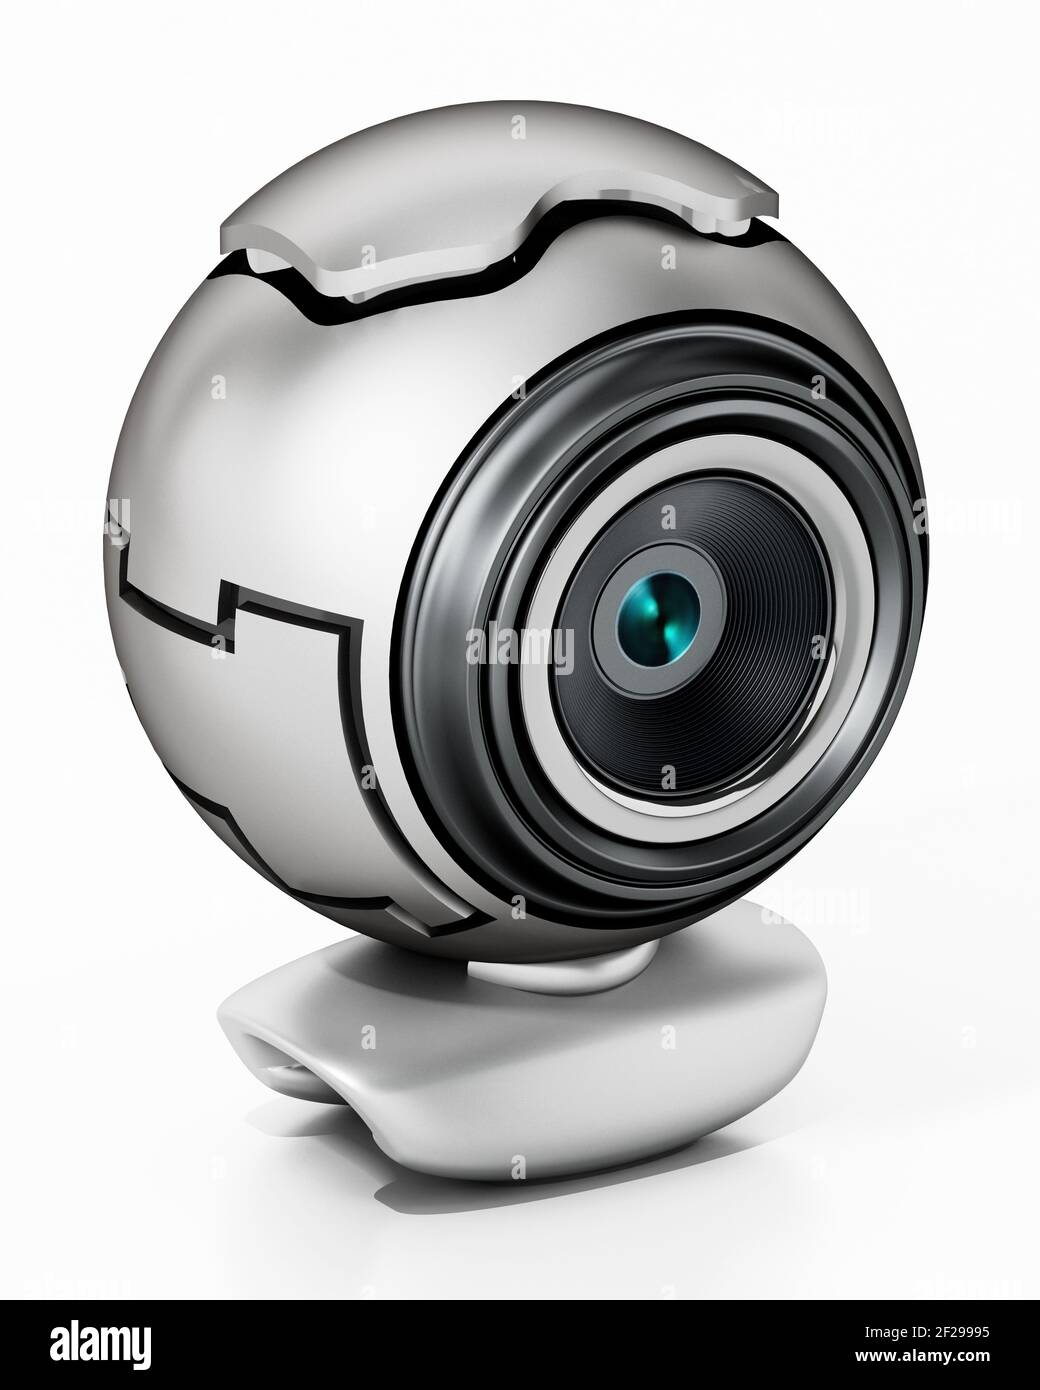 Generic computer webcam isolated on white background. 3D illustration. Stock Photo